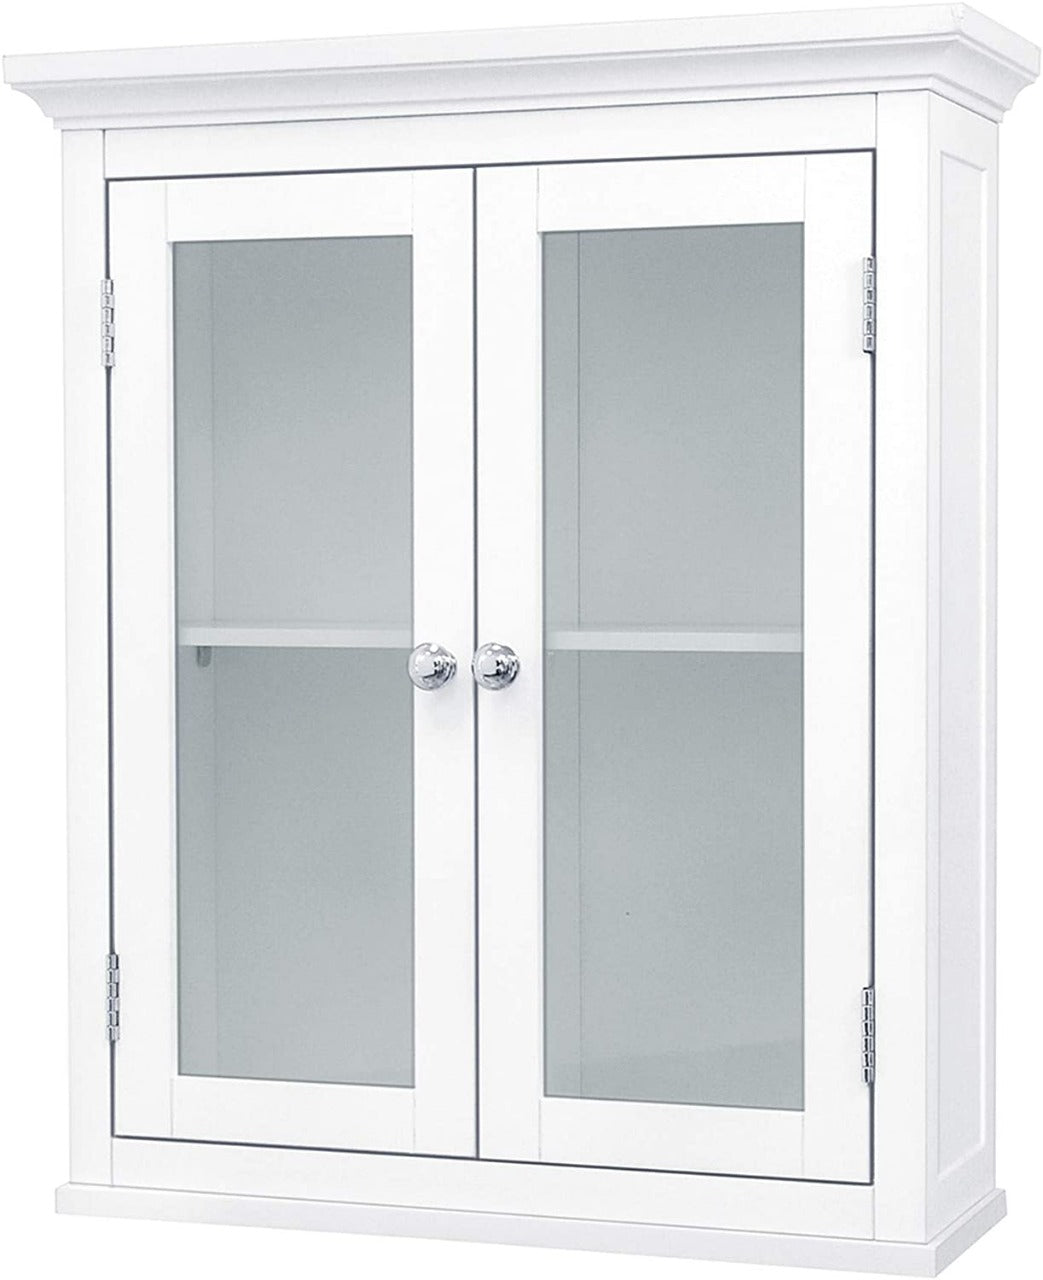 Wall Cabinets: Wall Cabinet with 2 Doors